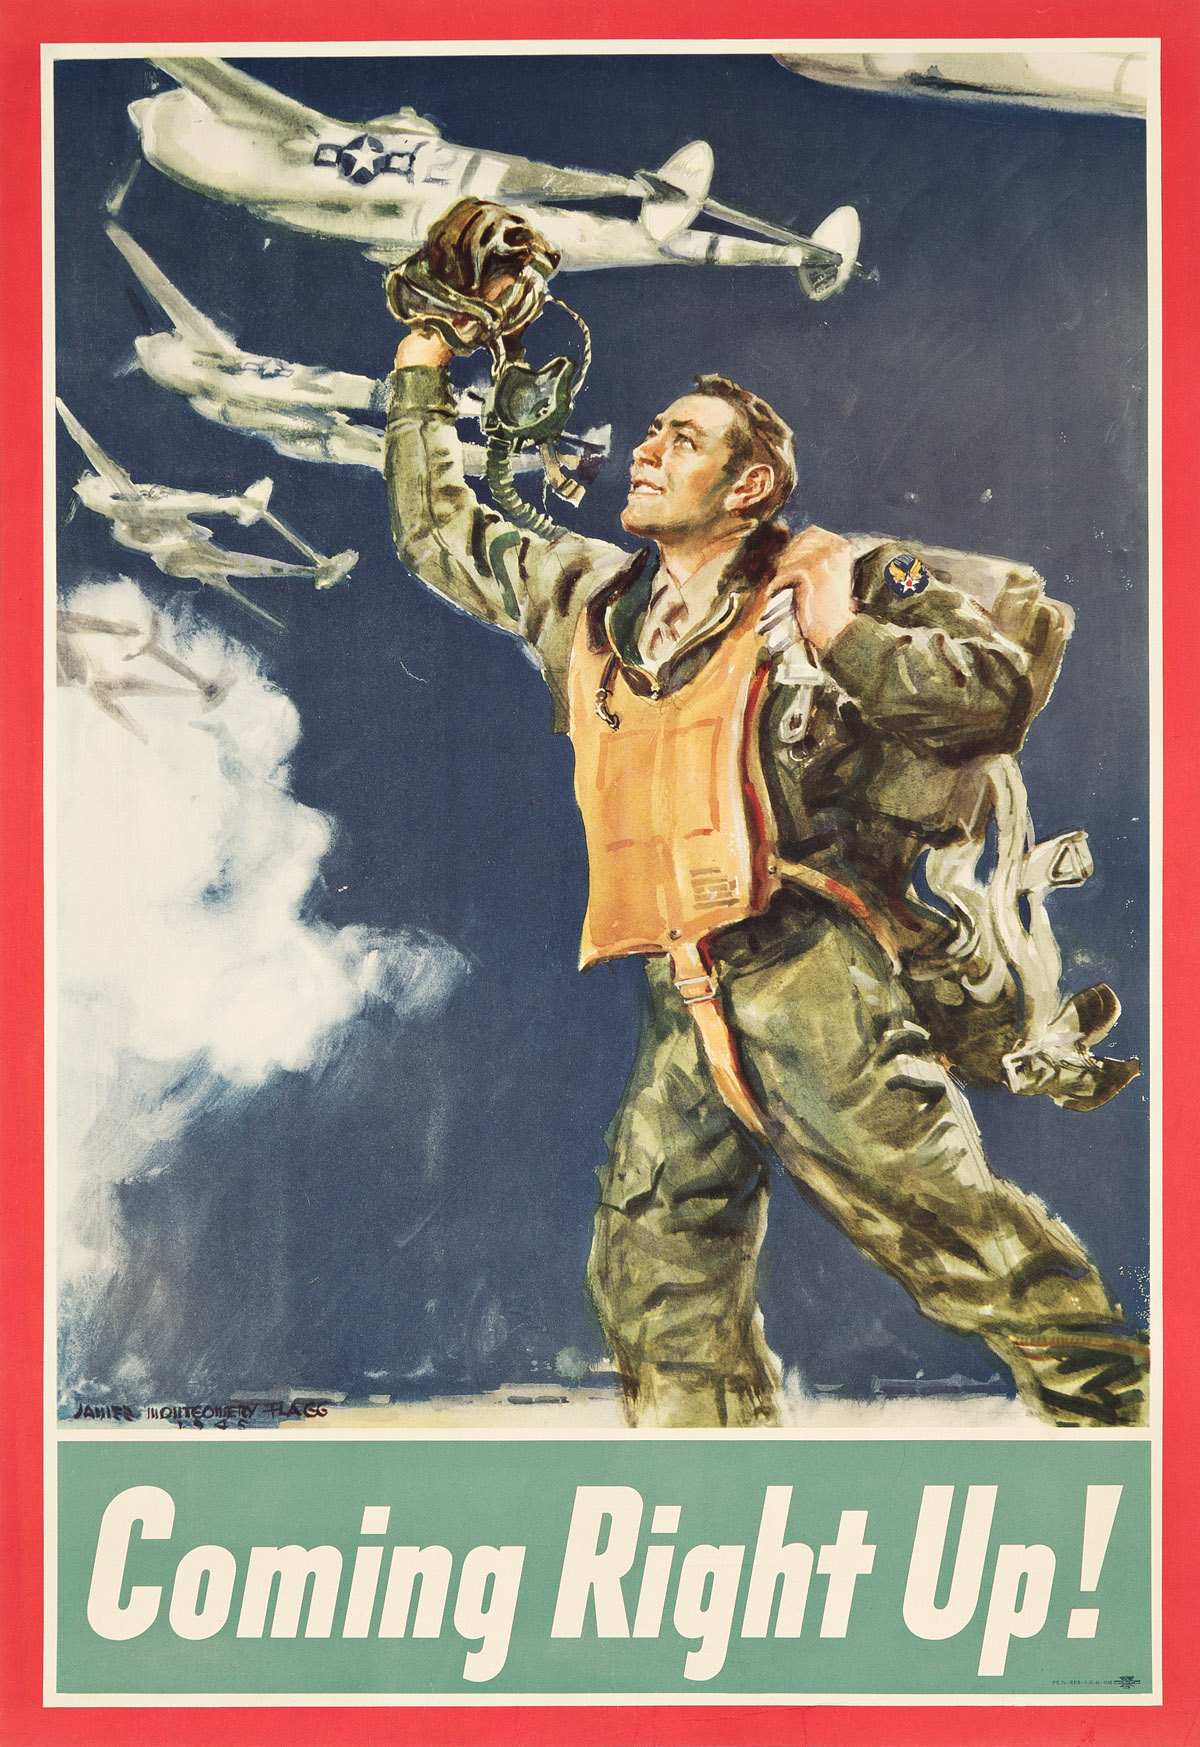 JAMES MONTGOMERY FLAGG (1870-1960).  COMING RIGHT UP! 1945. 35x24 inches, 89x61 cm. U.S. Army Recruiting Publicity Bureau, New York.